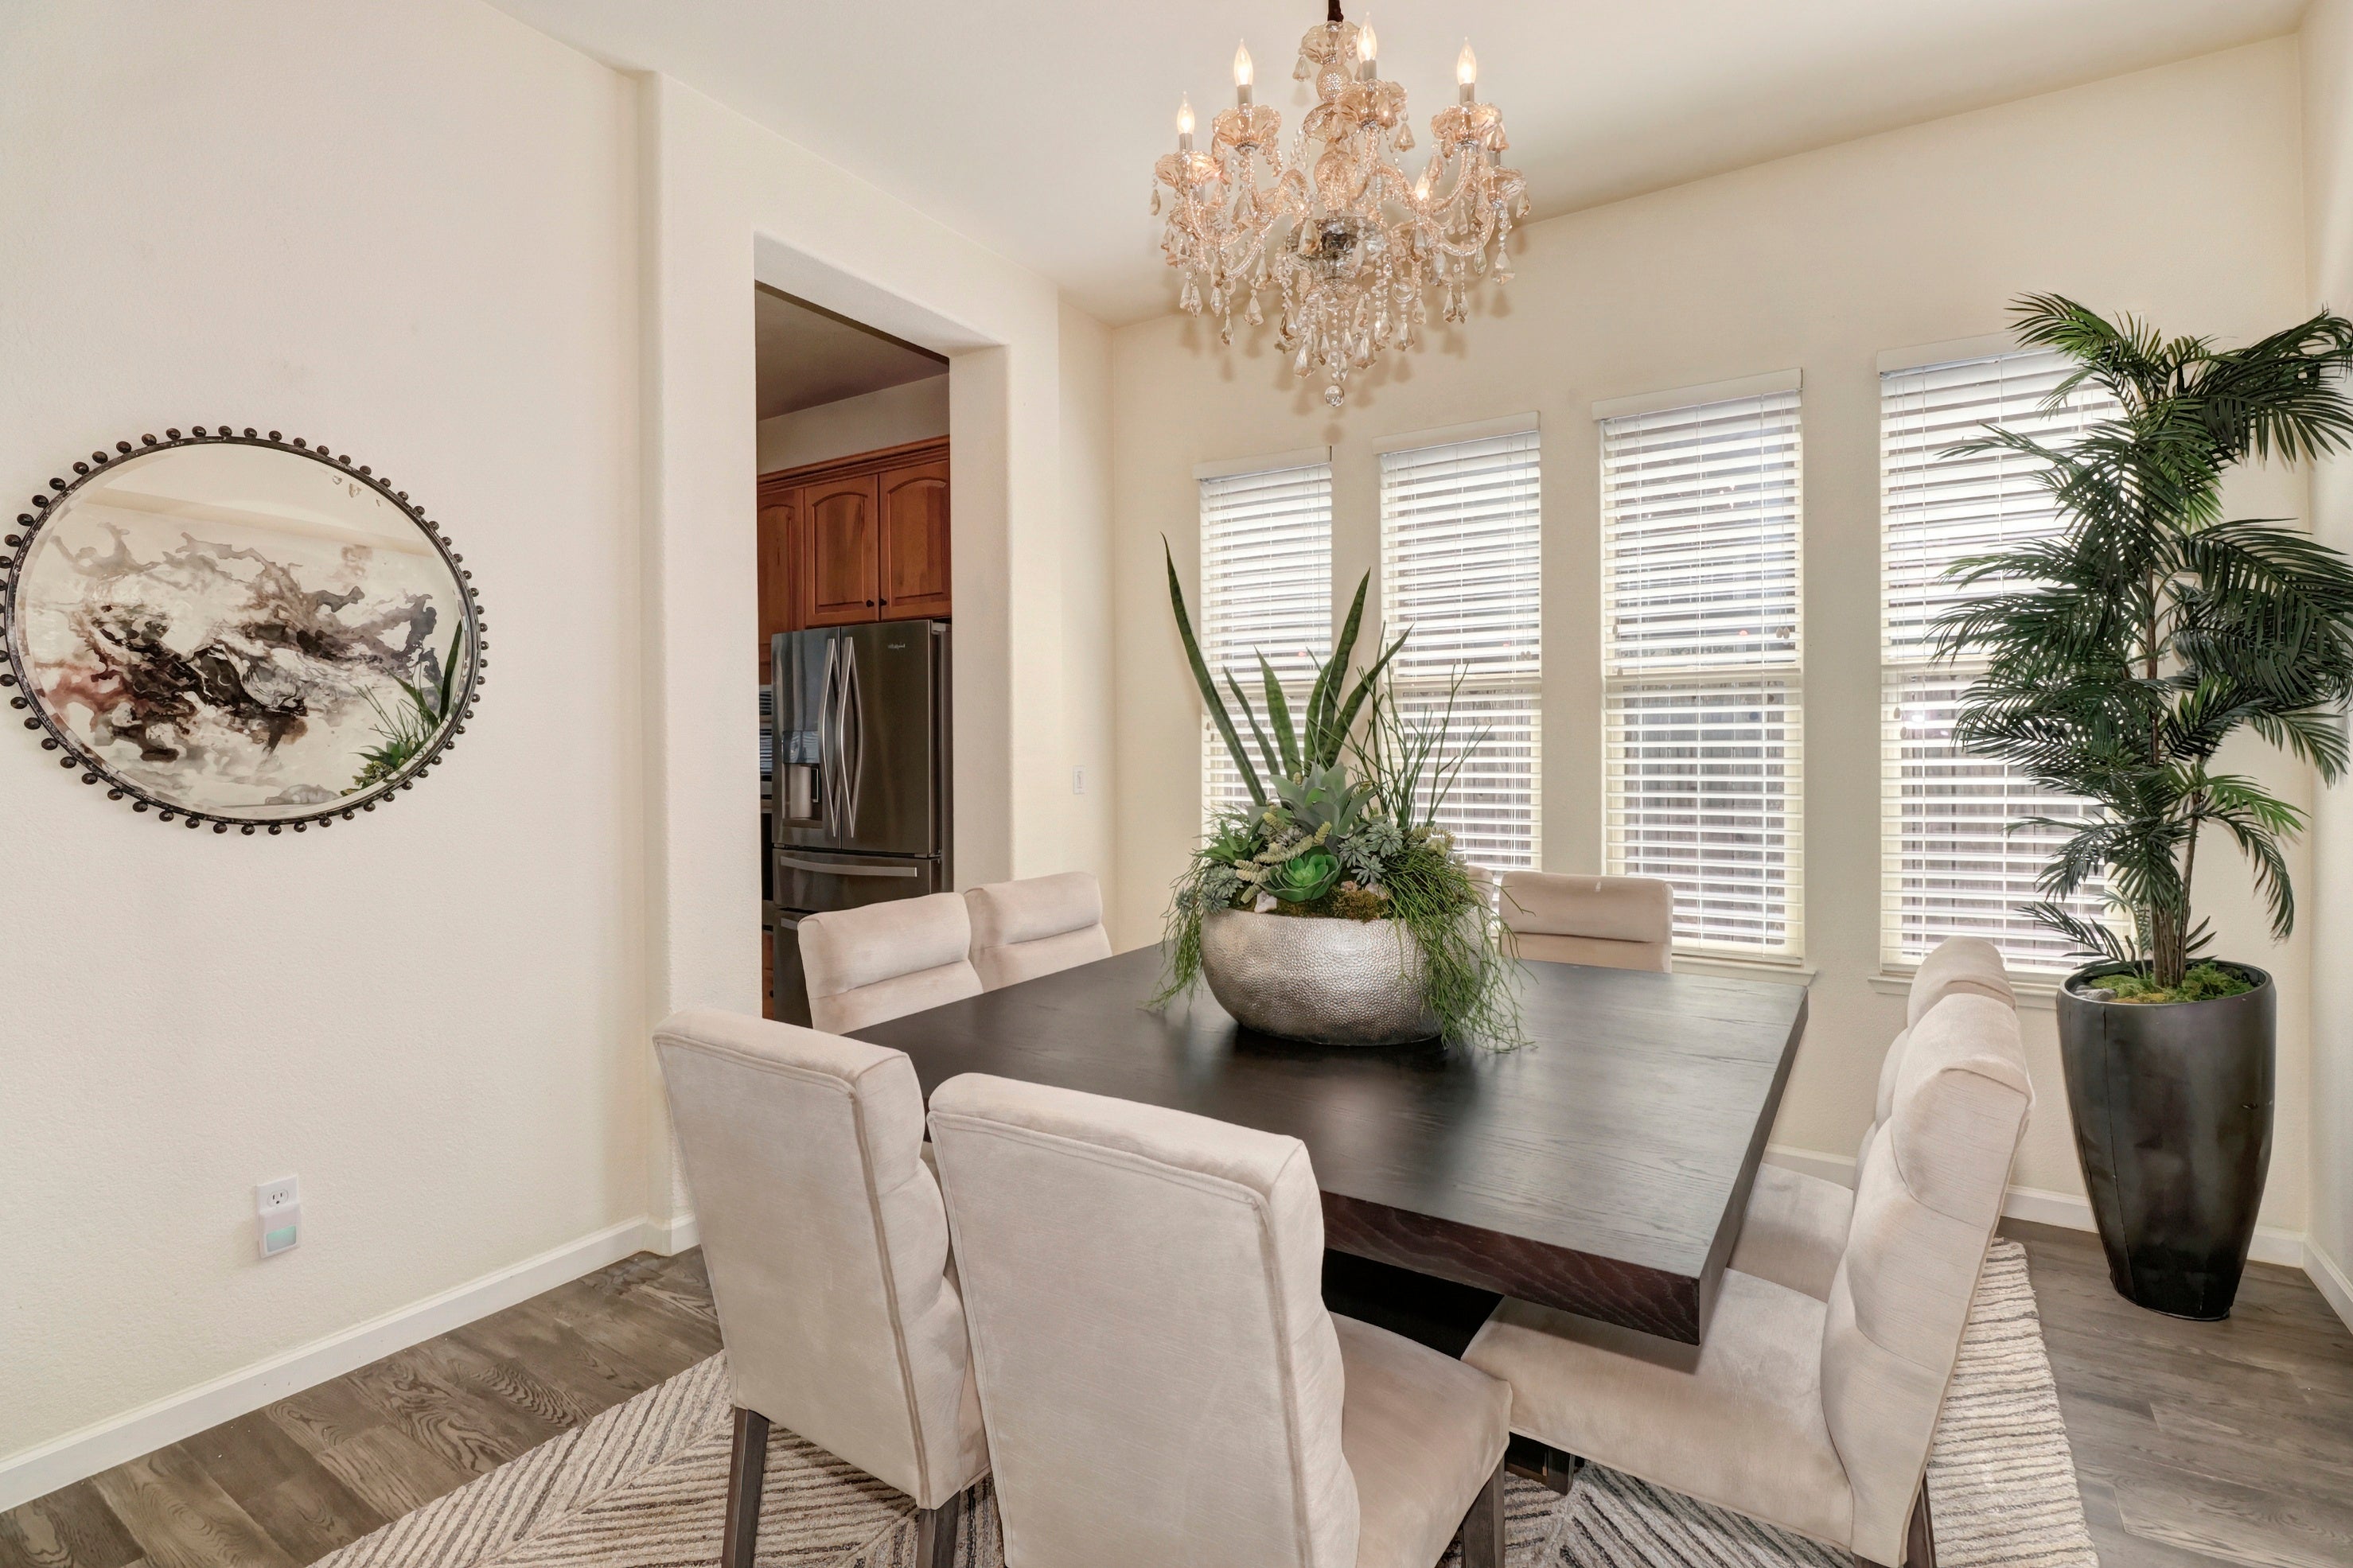 Premiere Home Staging Projects | Dining room interior design idea - Avondale Dr, Roseville